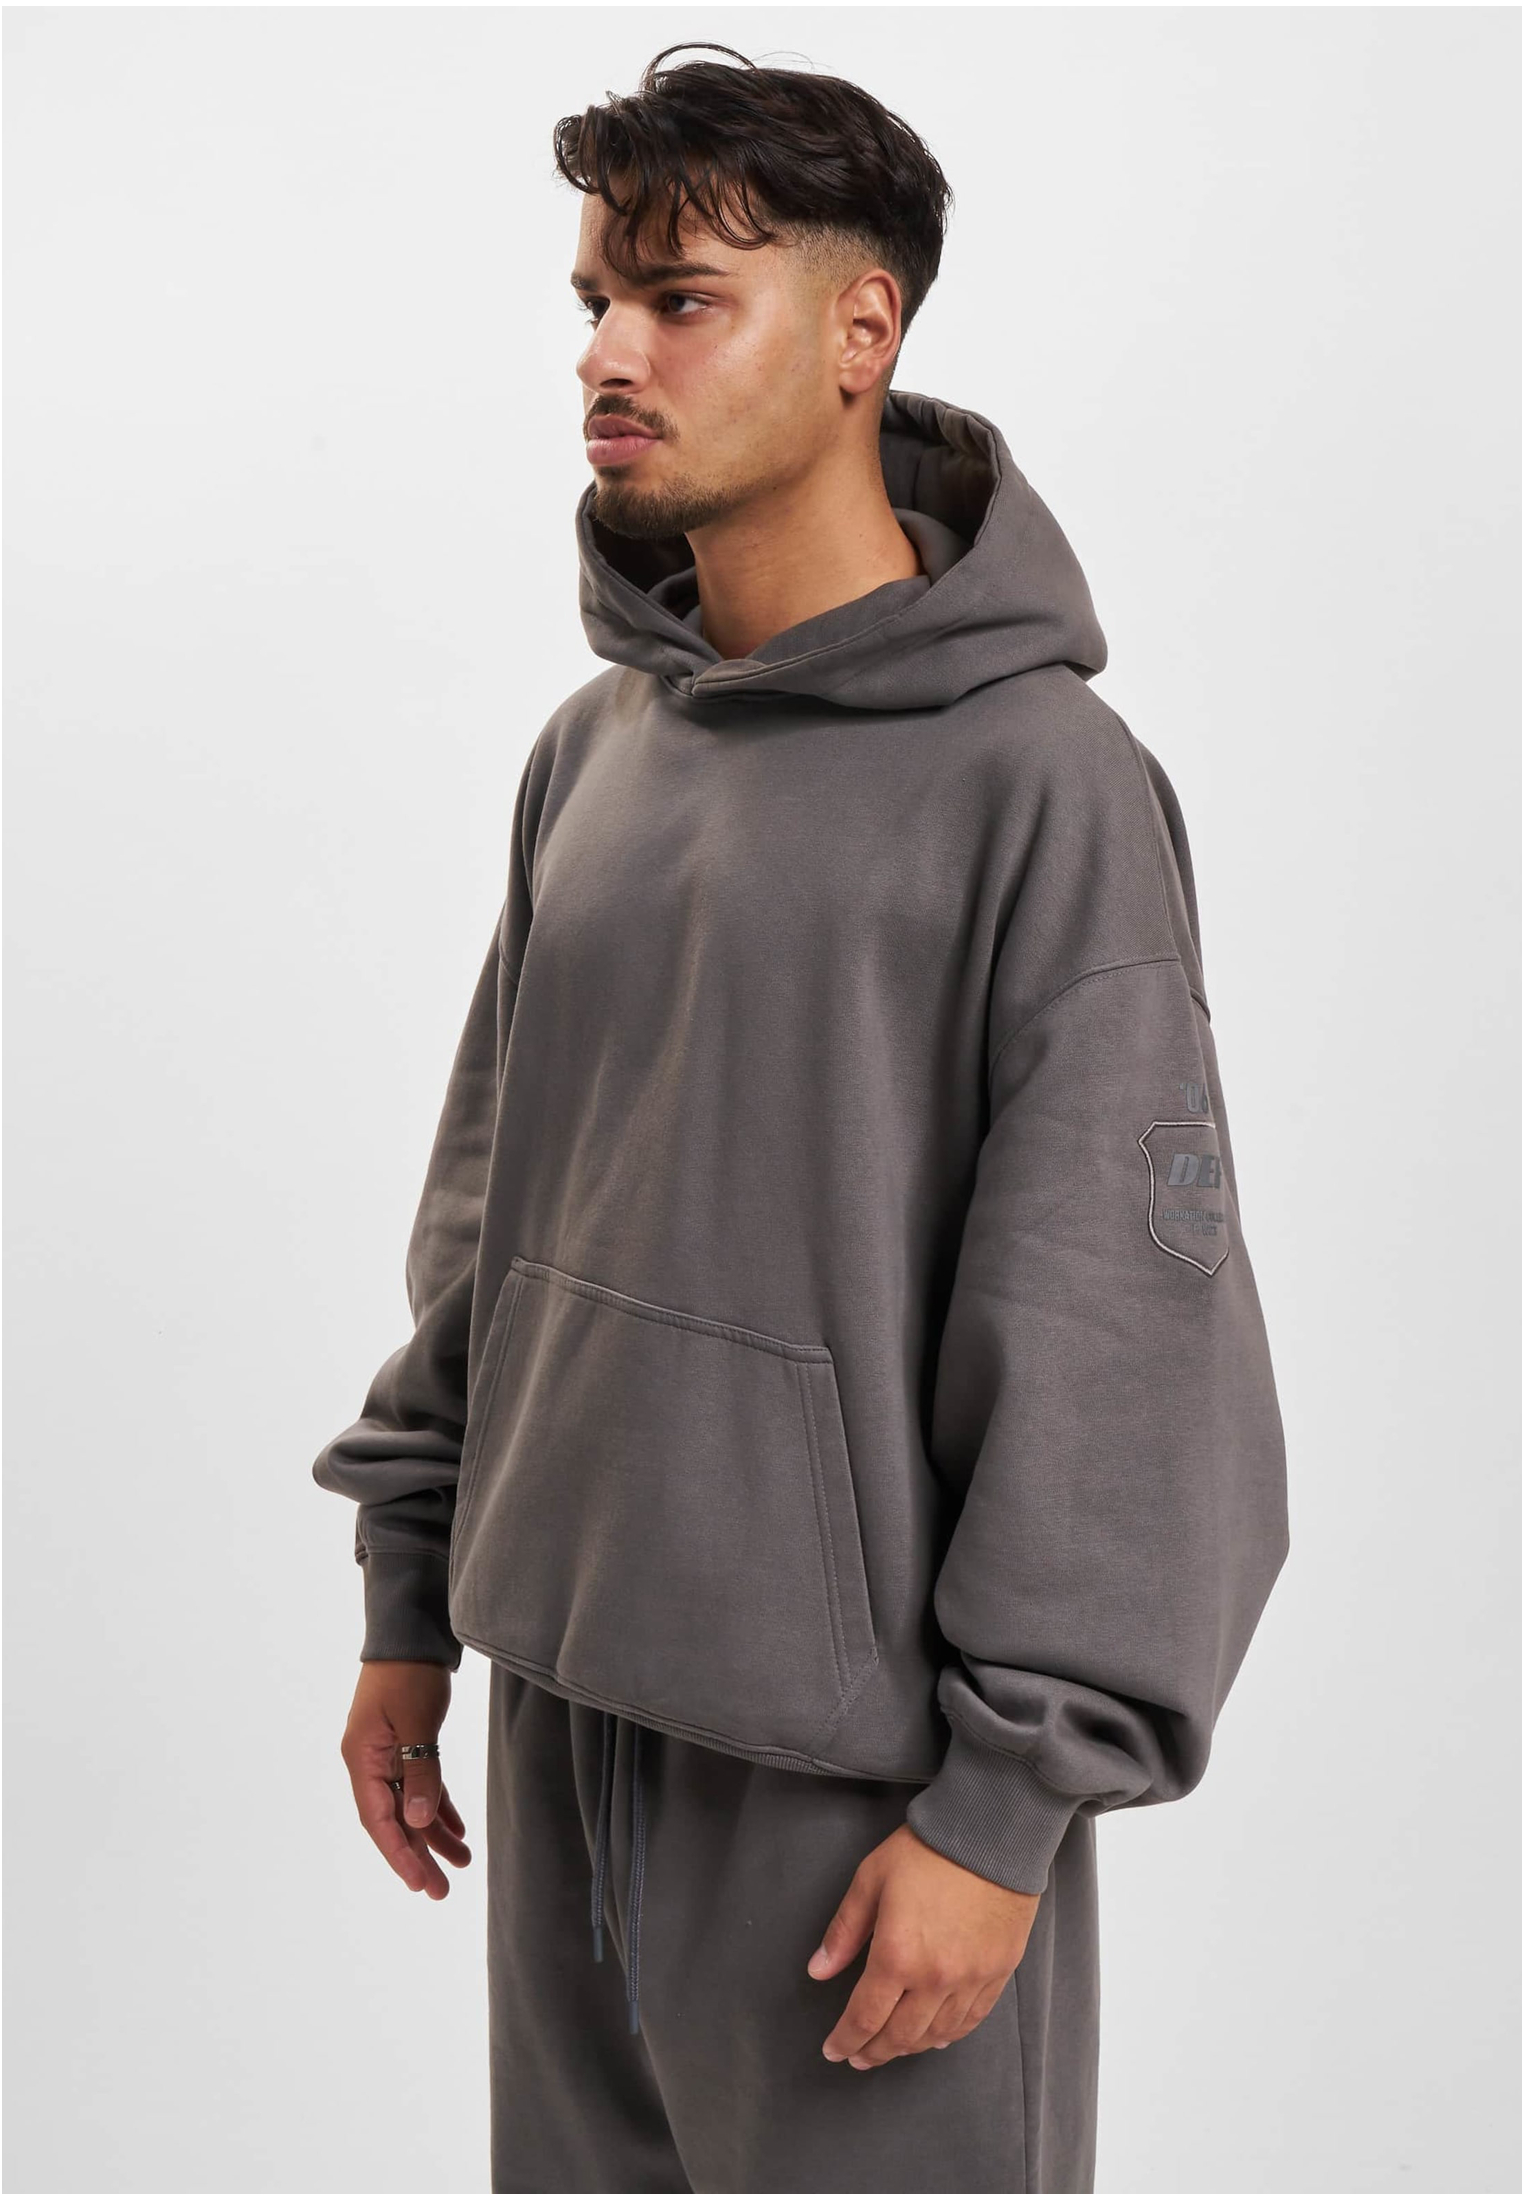 Men's Workation Hoody anthracite